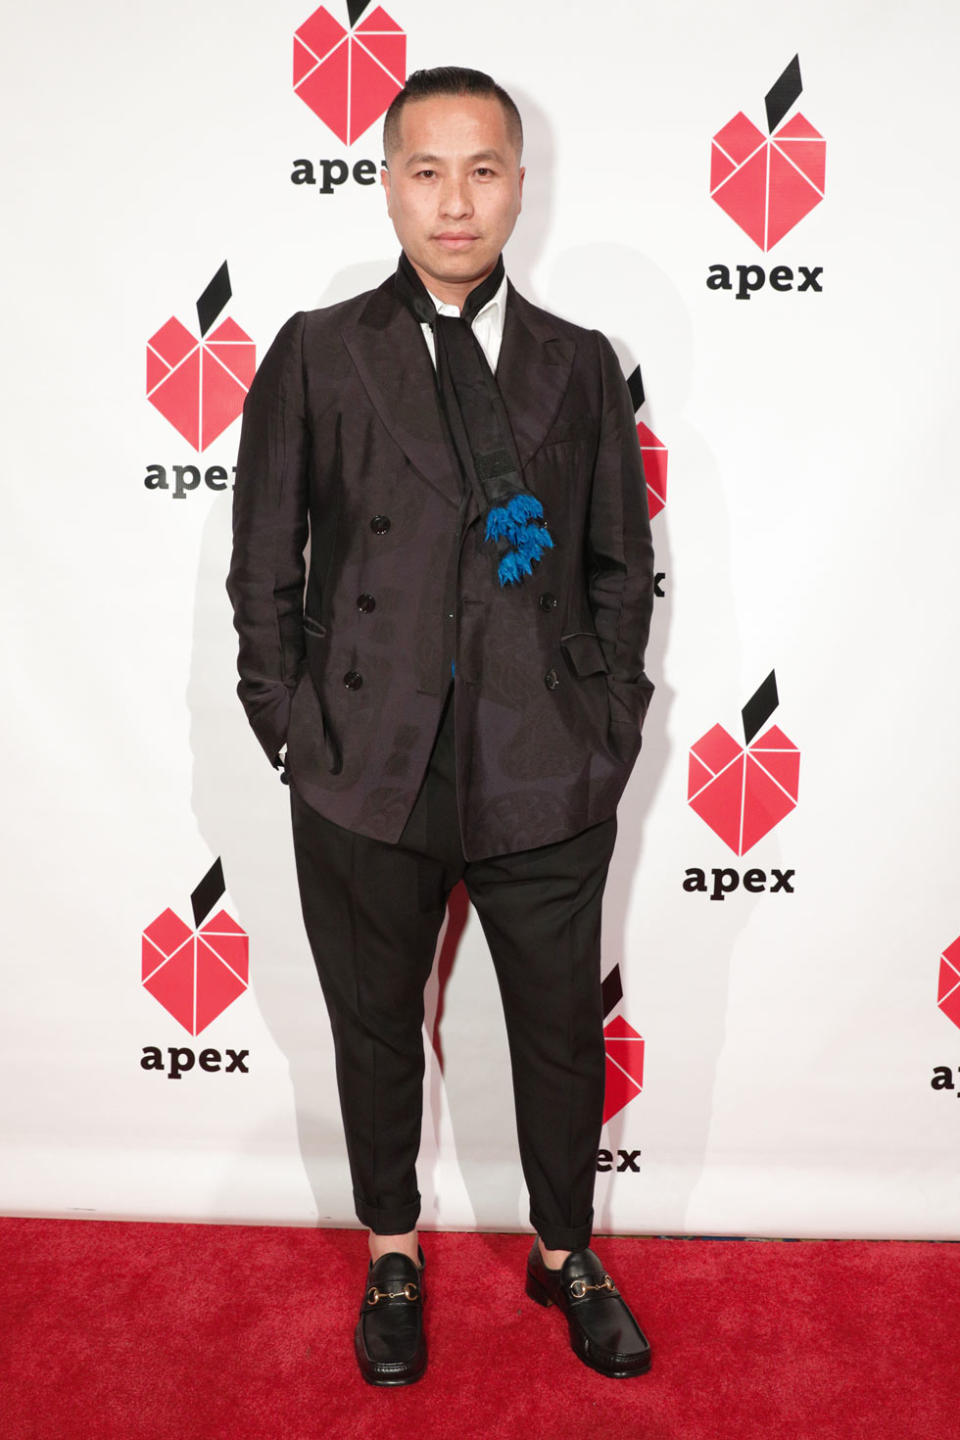 <p>Fashion designer Phillip Lim offers these words of wisdom: “Being a minority myself, being an immigrant myself, people are always asking me ‘How do you find success?’ Here’s how you do it. You turn around and bring people along. Keep going, keep going; it [success] will find you.”<br> (Photo: BFA/courtesy of Apex for Youth) </p>